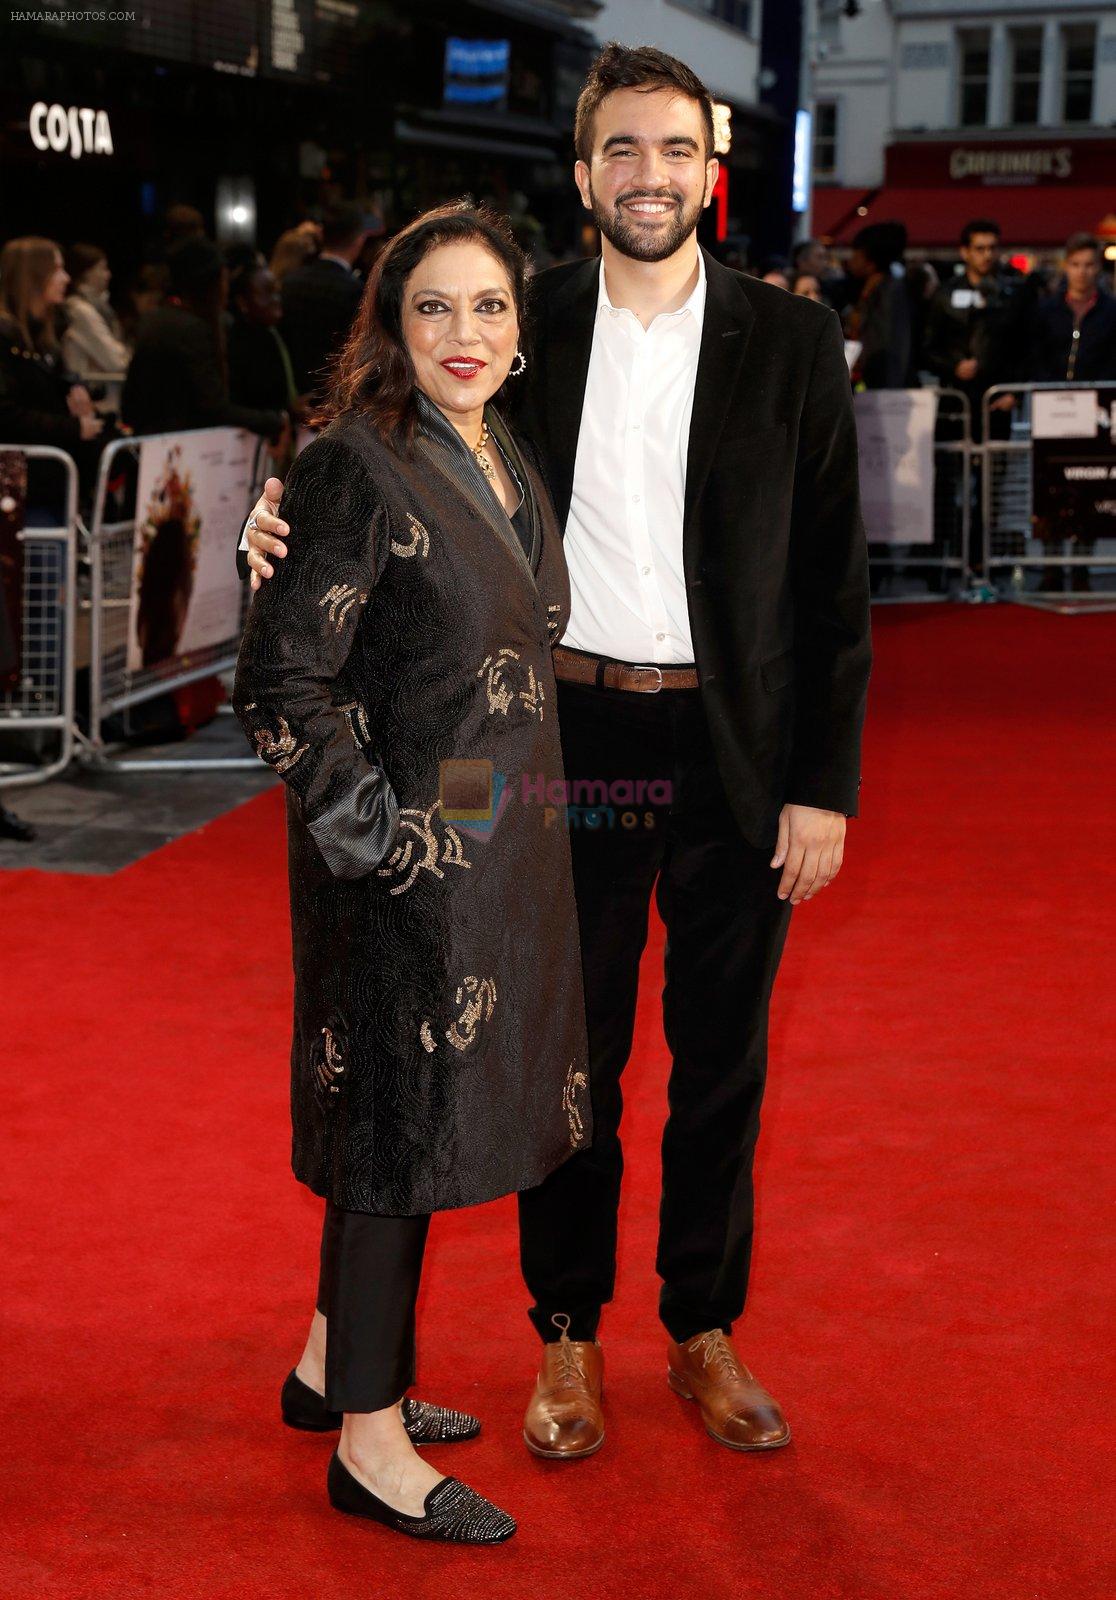 at Mira Nair's Queen of Katwe premiere in BFI London Film Festival on 10th Oct 2016